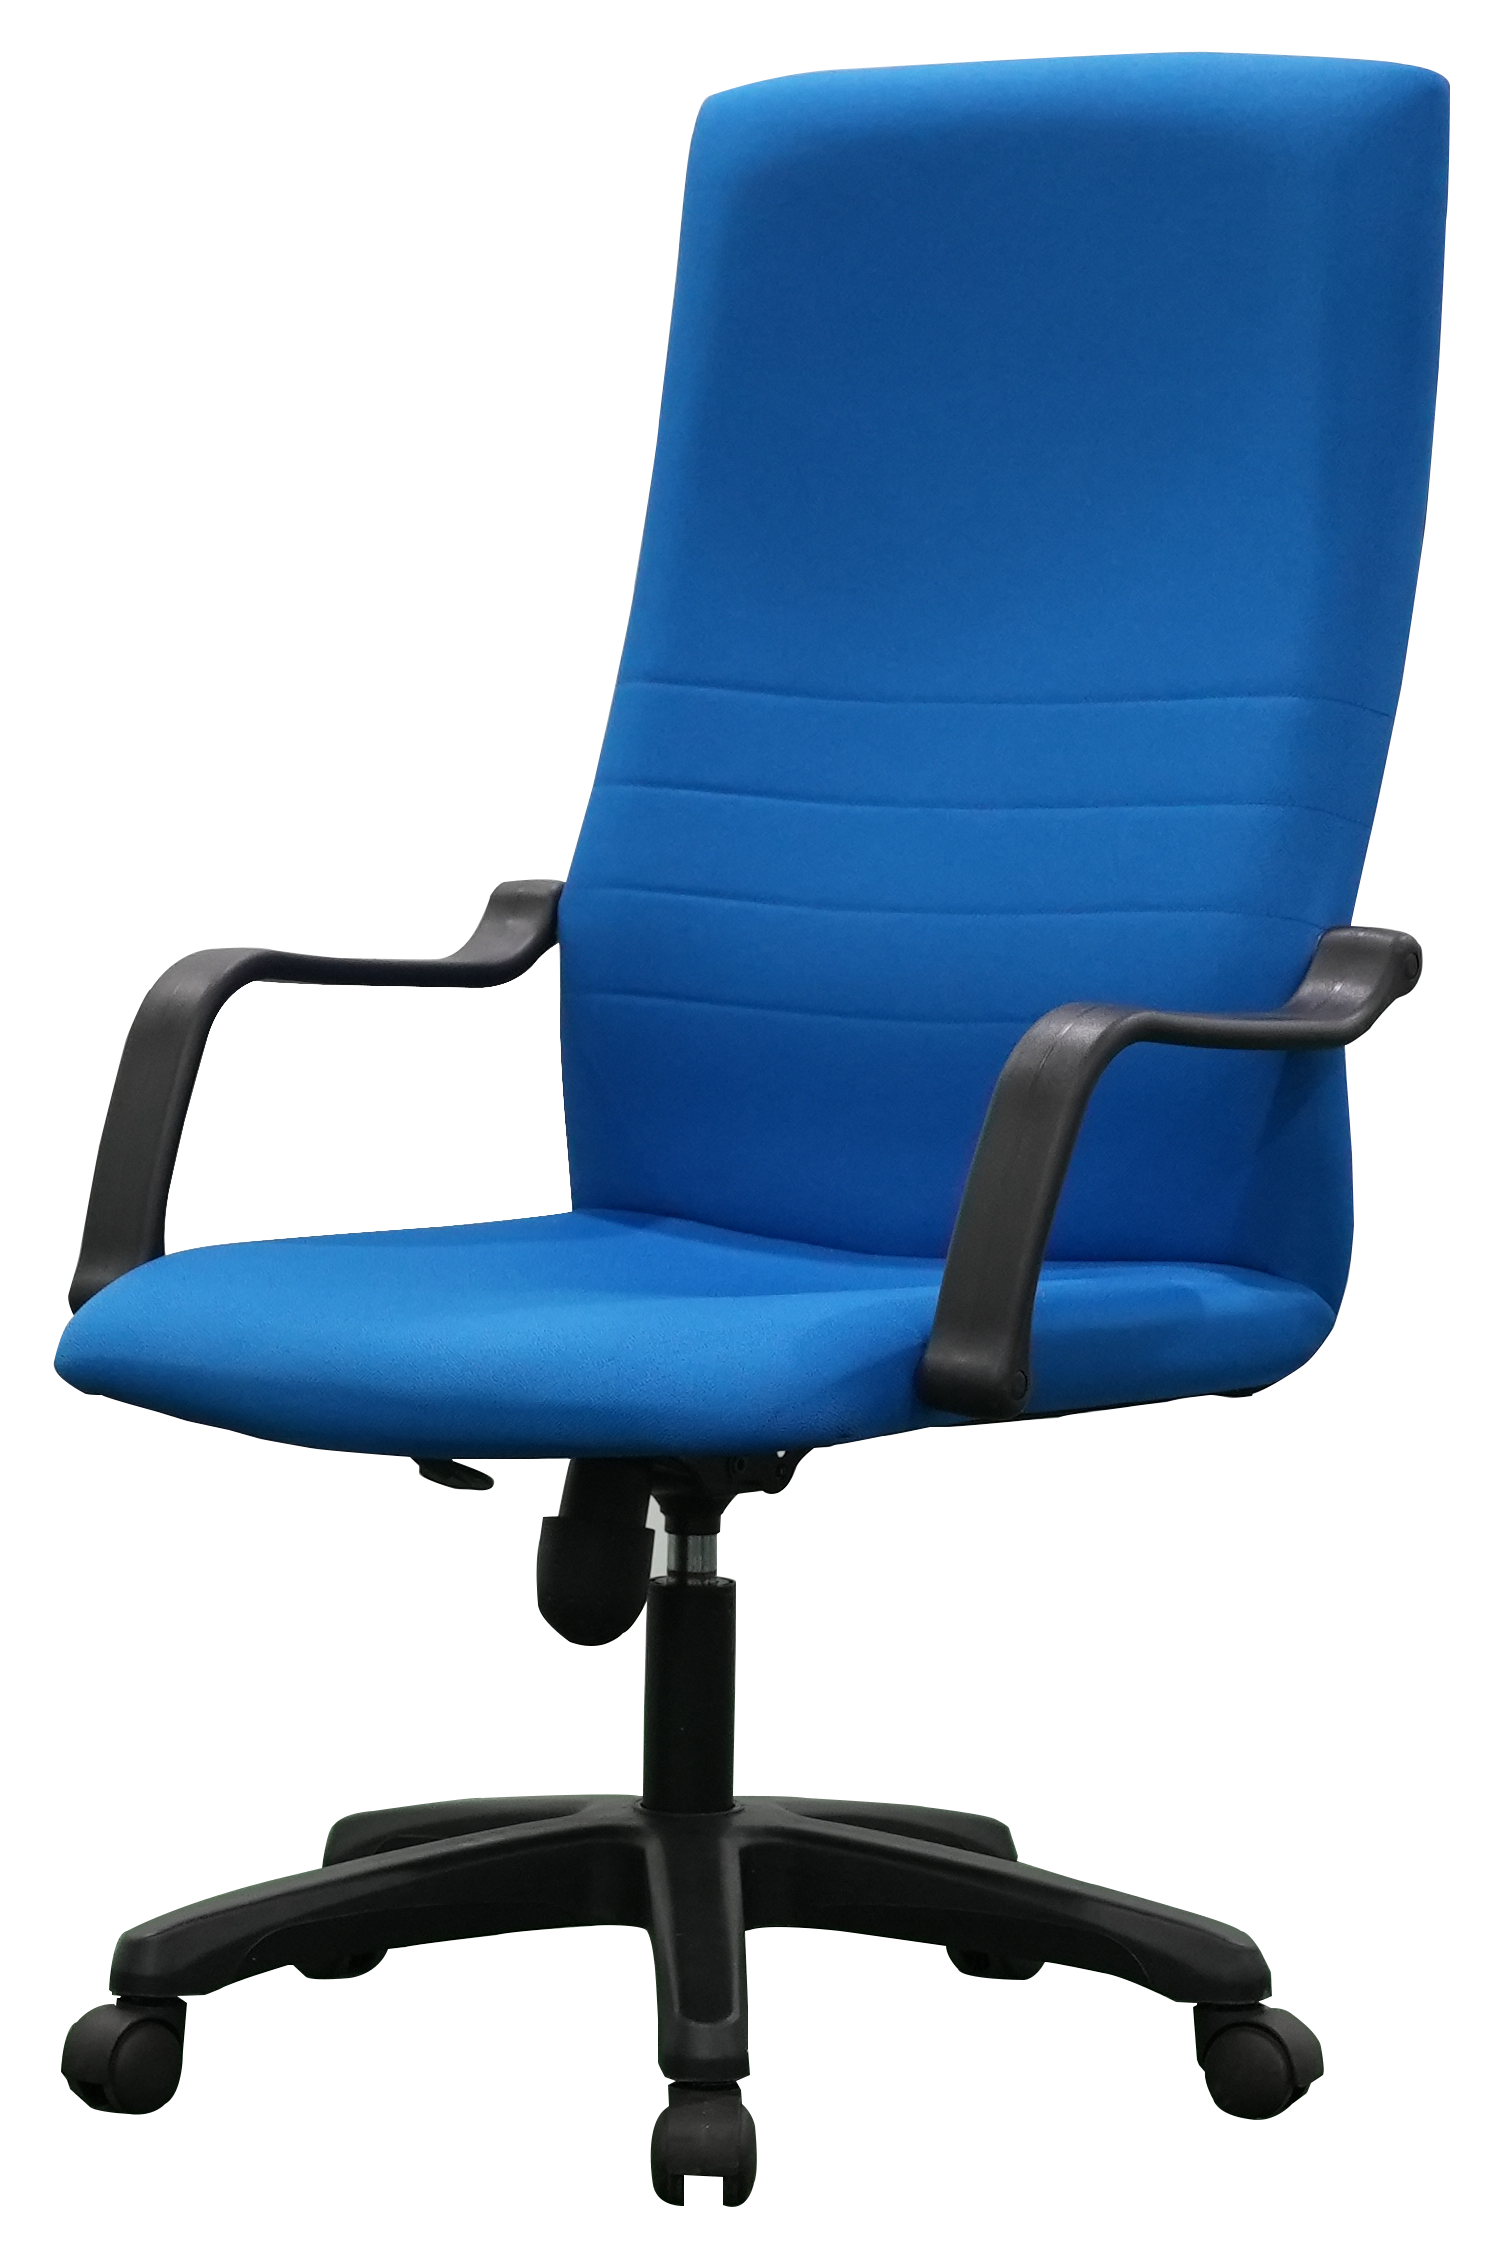 Economy Office Chair - FC 501